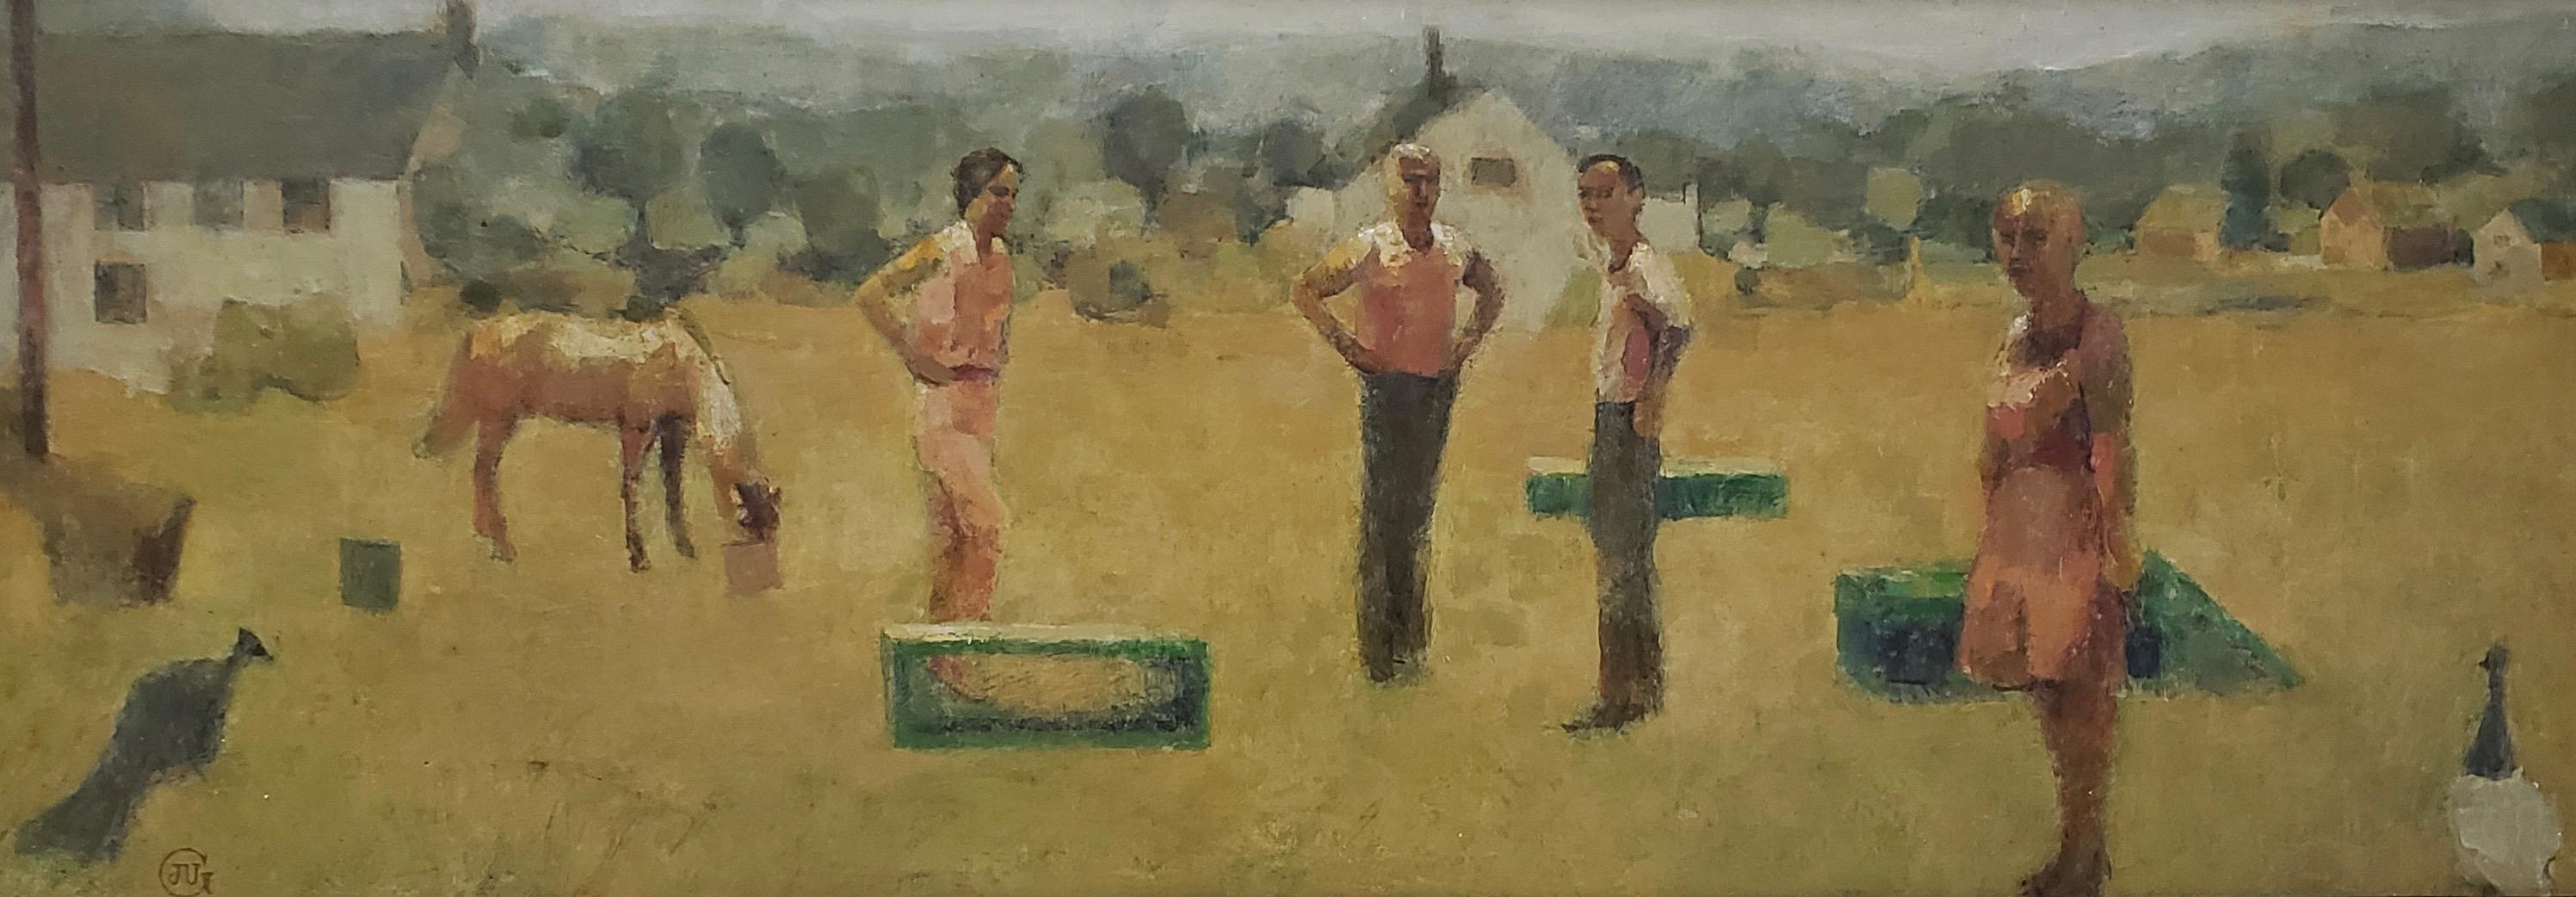 Jeanne Urich Gorham (American, 20th century)

Original oil on panel by listed American artist Jeanne Urich Gorman circa 1960s

The painting depicts four figures standing in an open field with a horse, peacock and various geometric boxes.

This